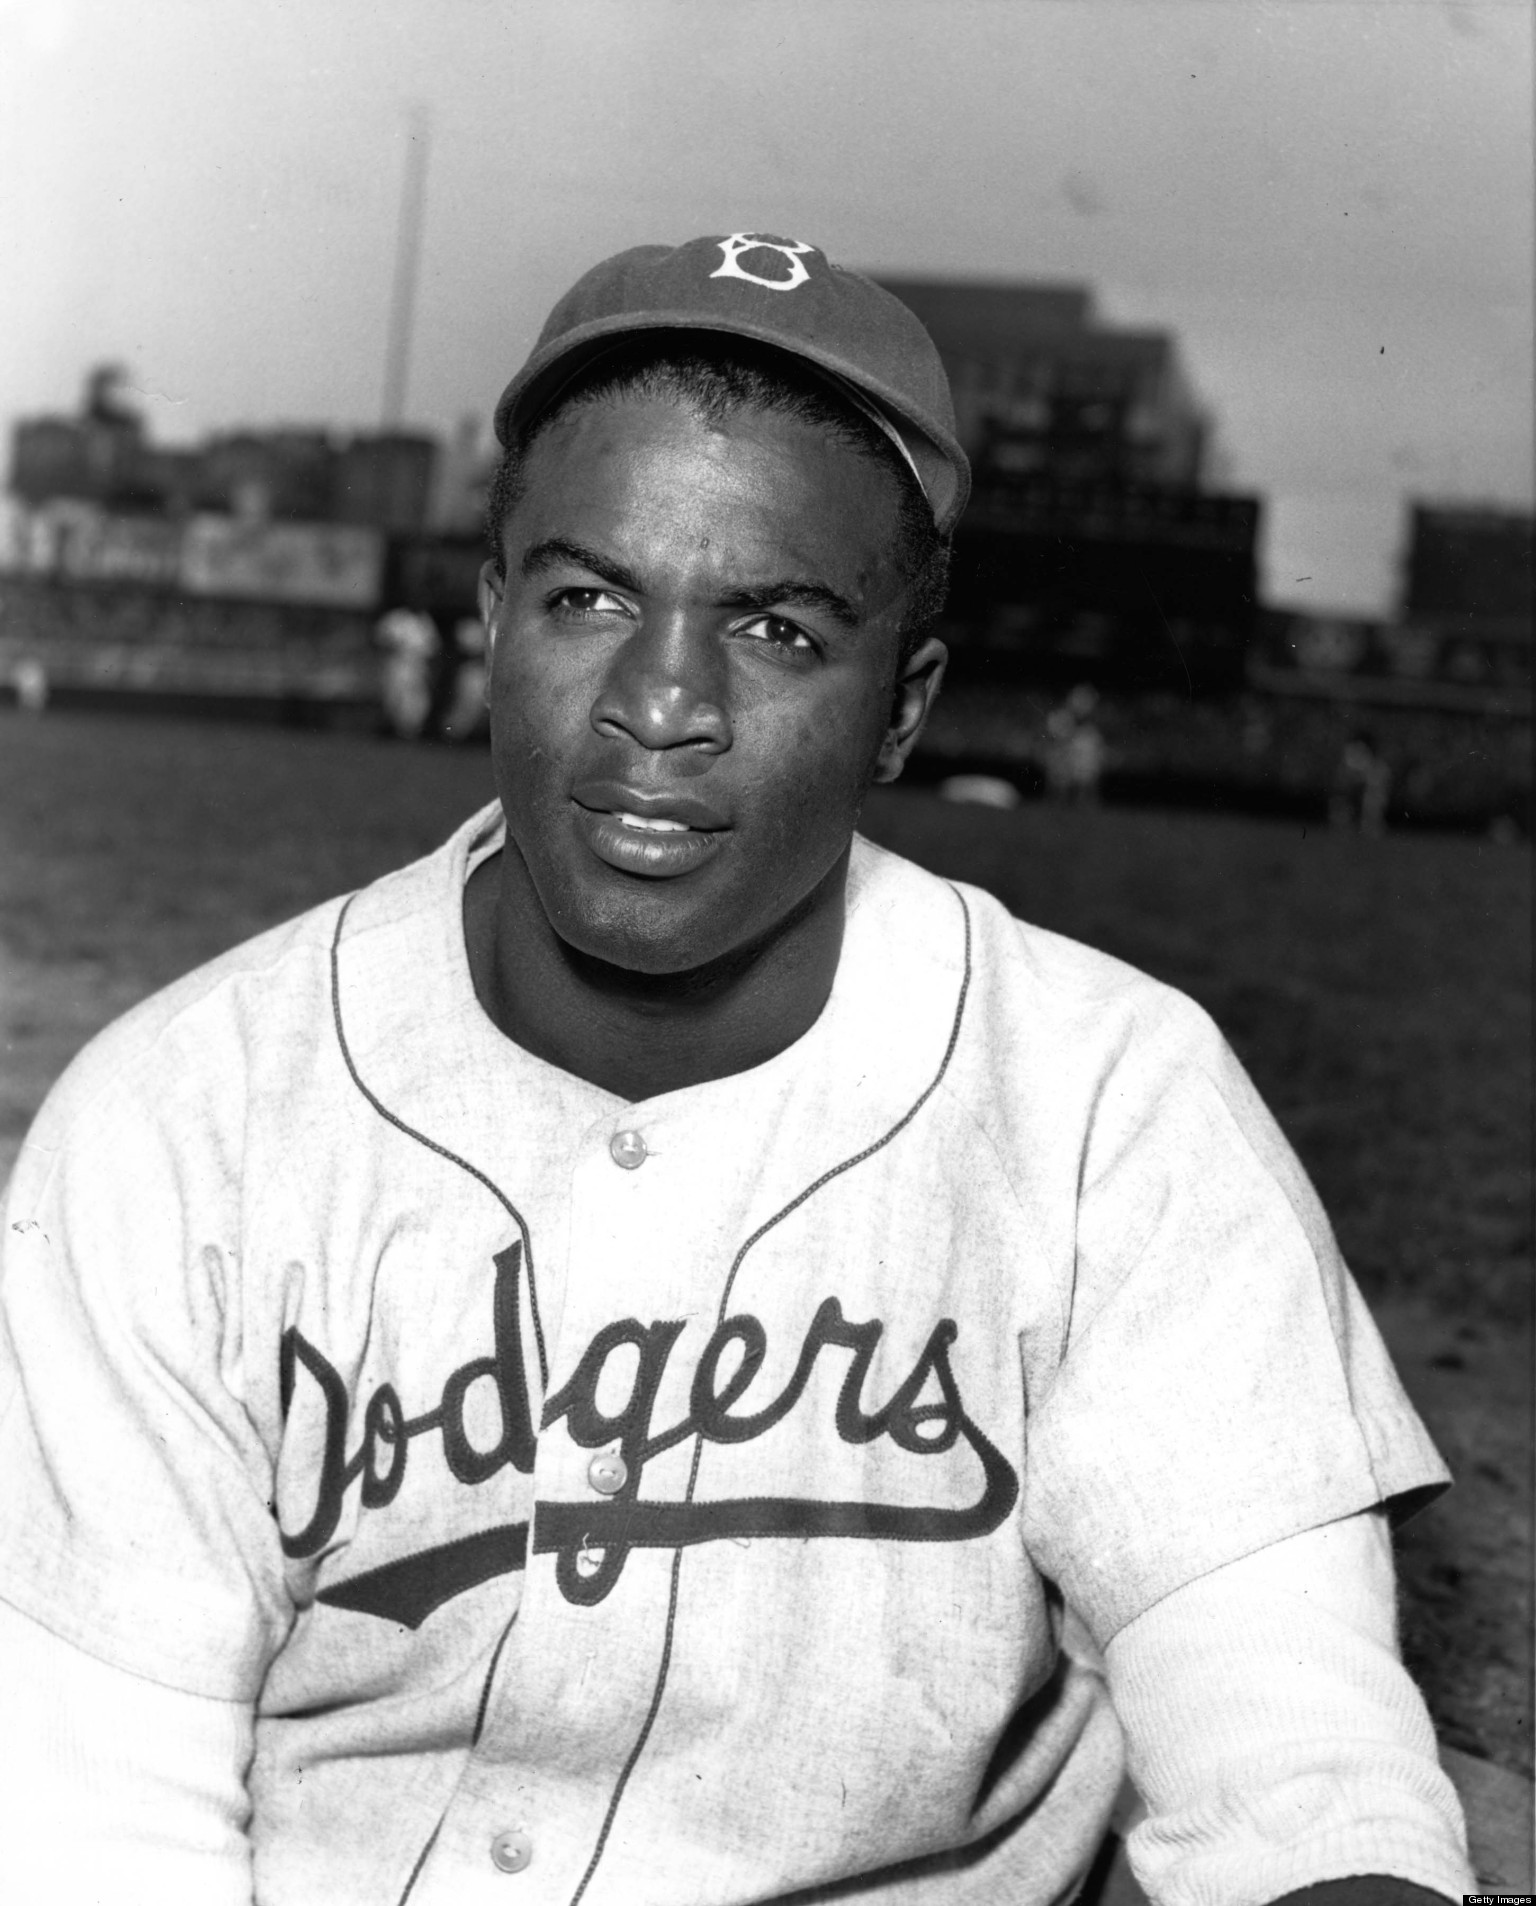 Jackie Robinson as a player for the Dodgers